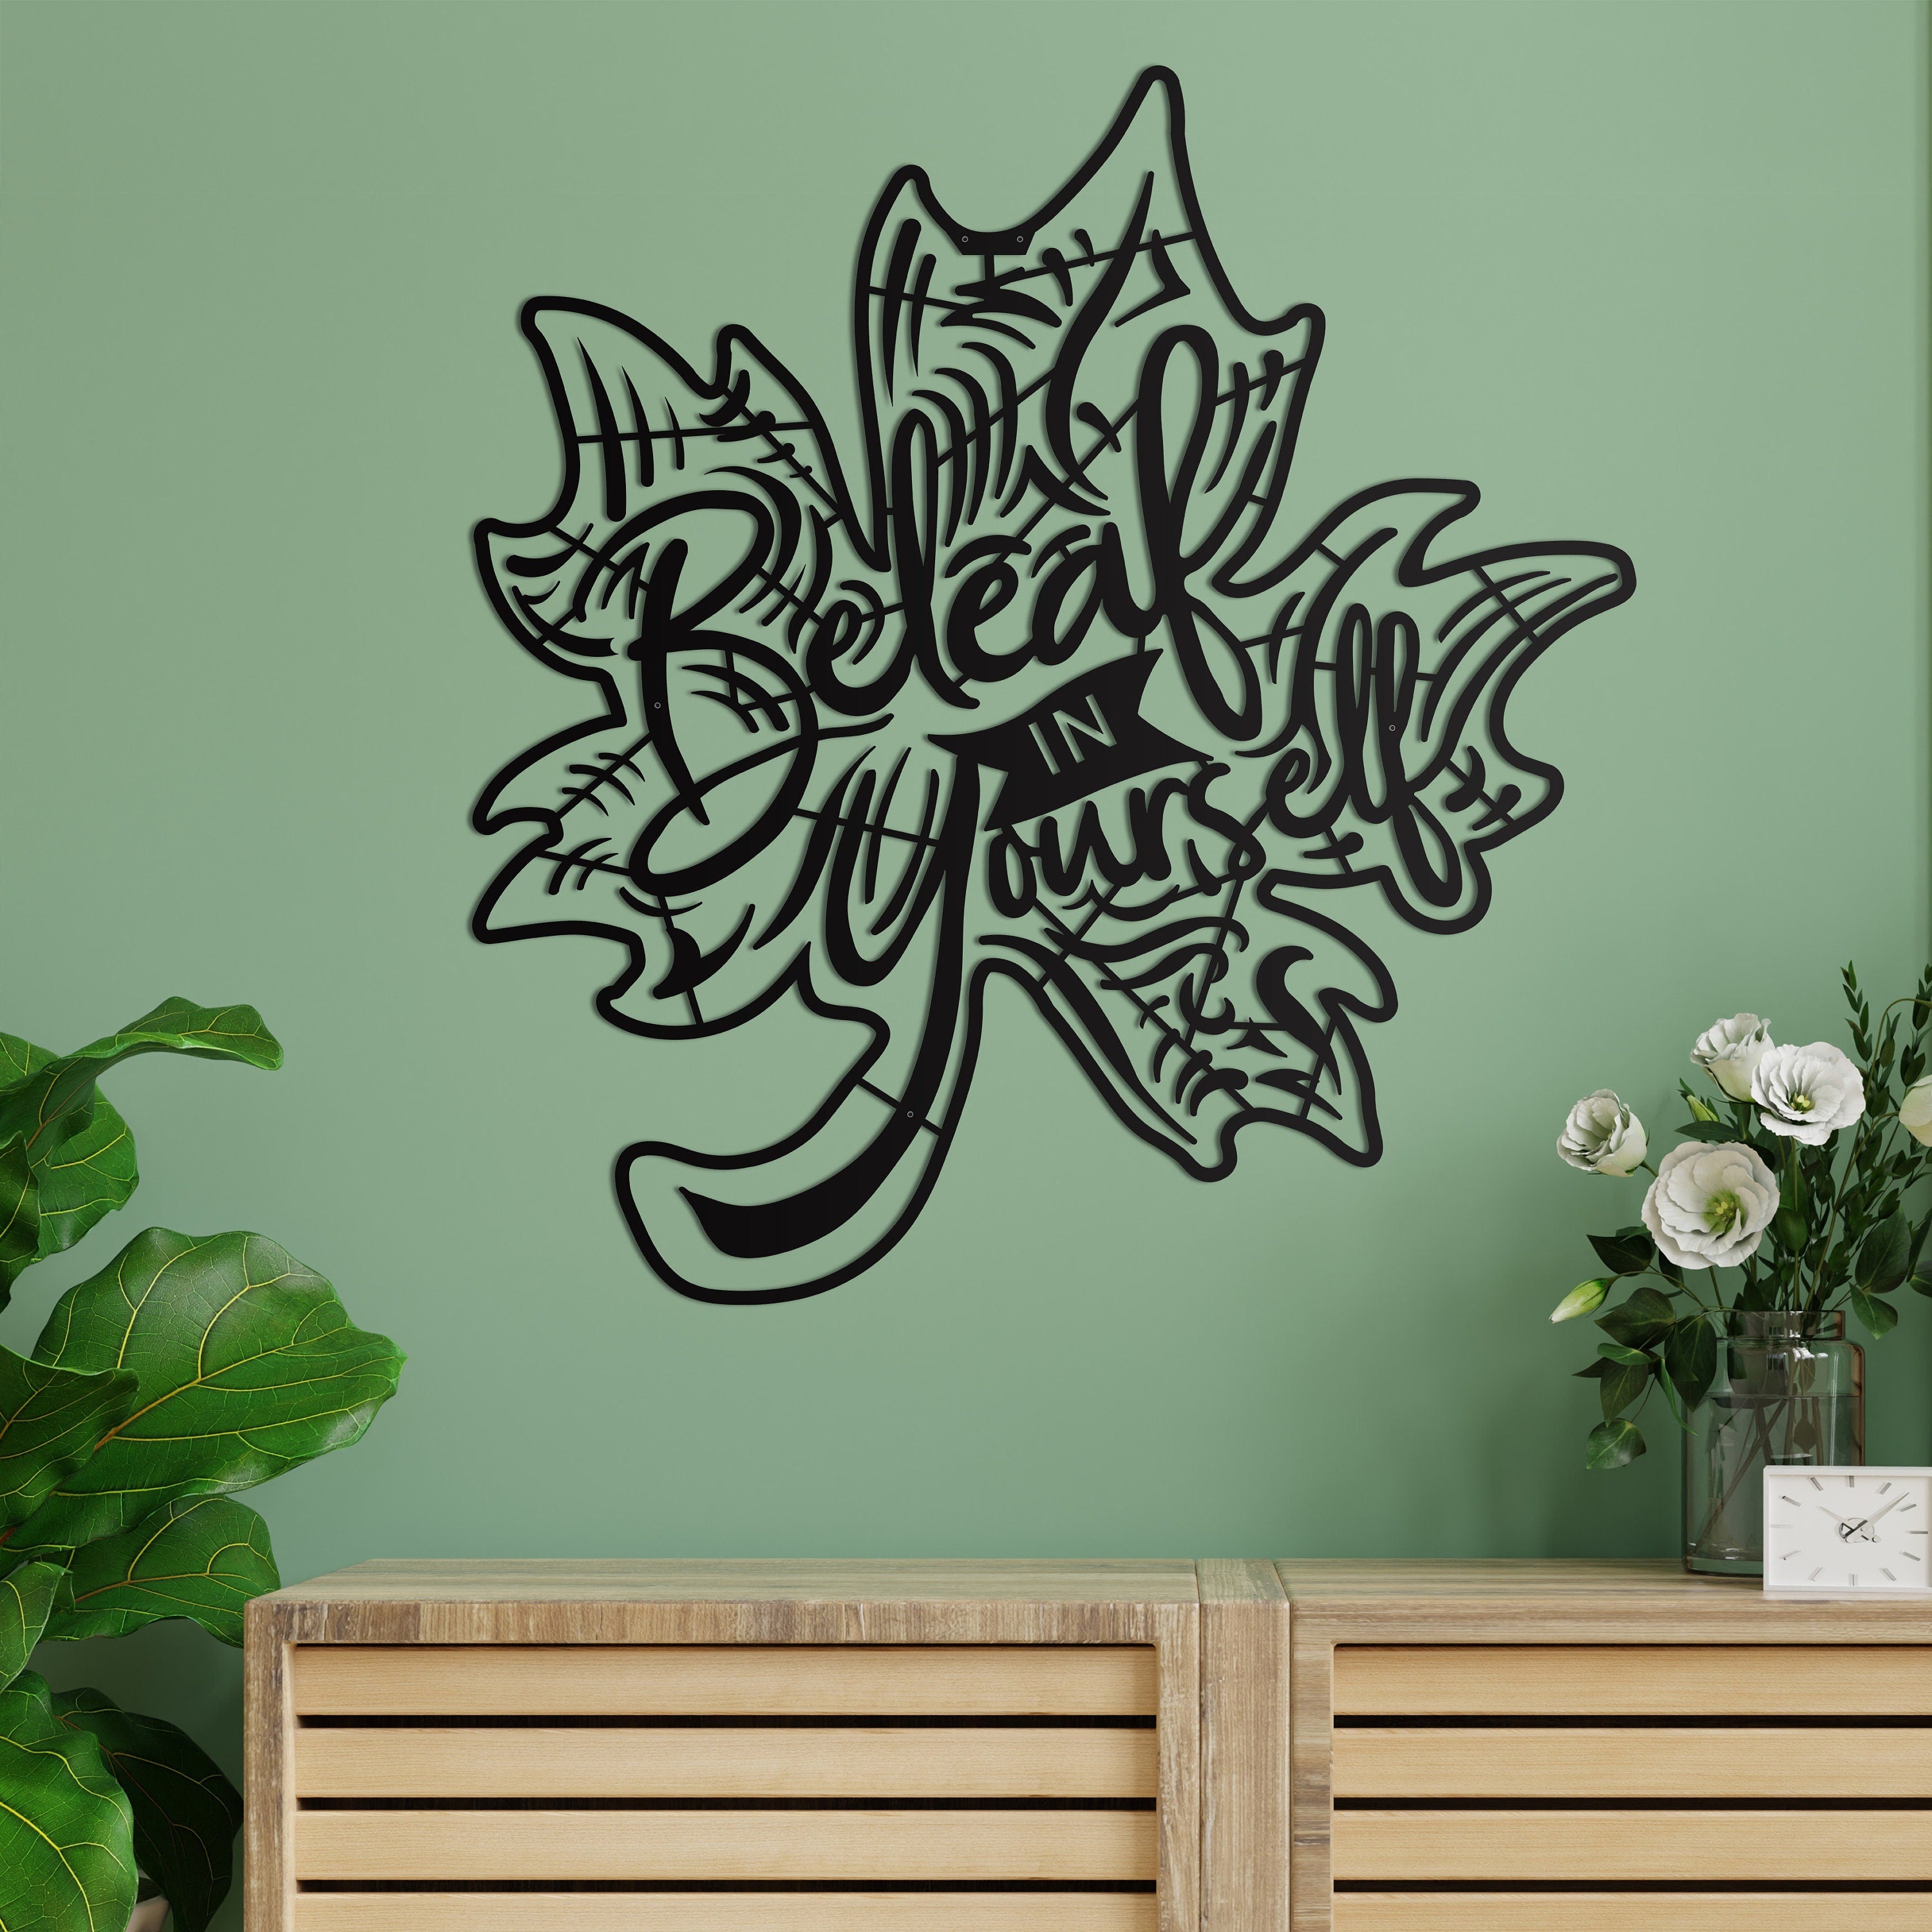 Living Room Wall Decor, Beleaf in Your Self, Metal Wall Decor, Unique Wall Decor, Over The Bed Wall Decor, Housewarming Gift, Large Wall Art